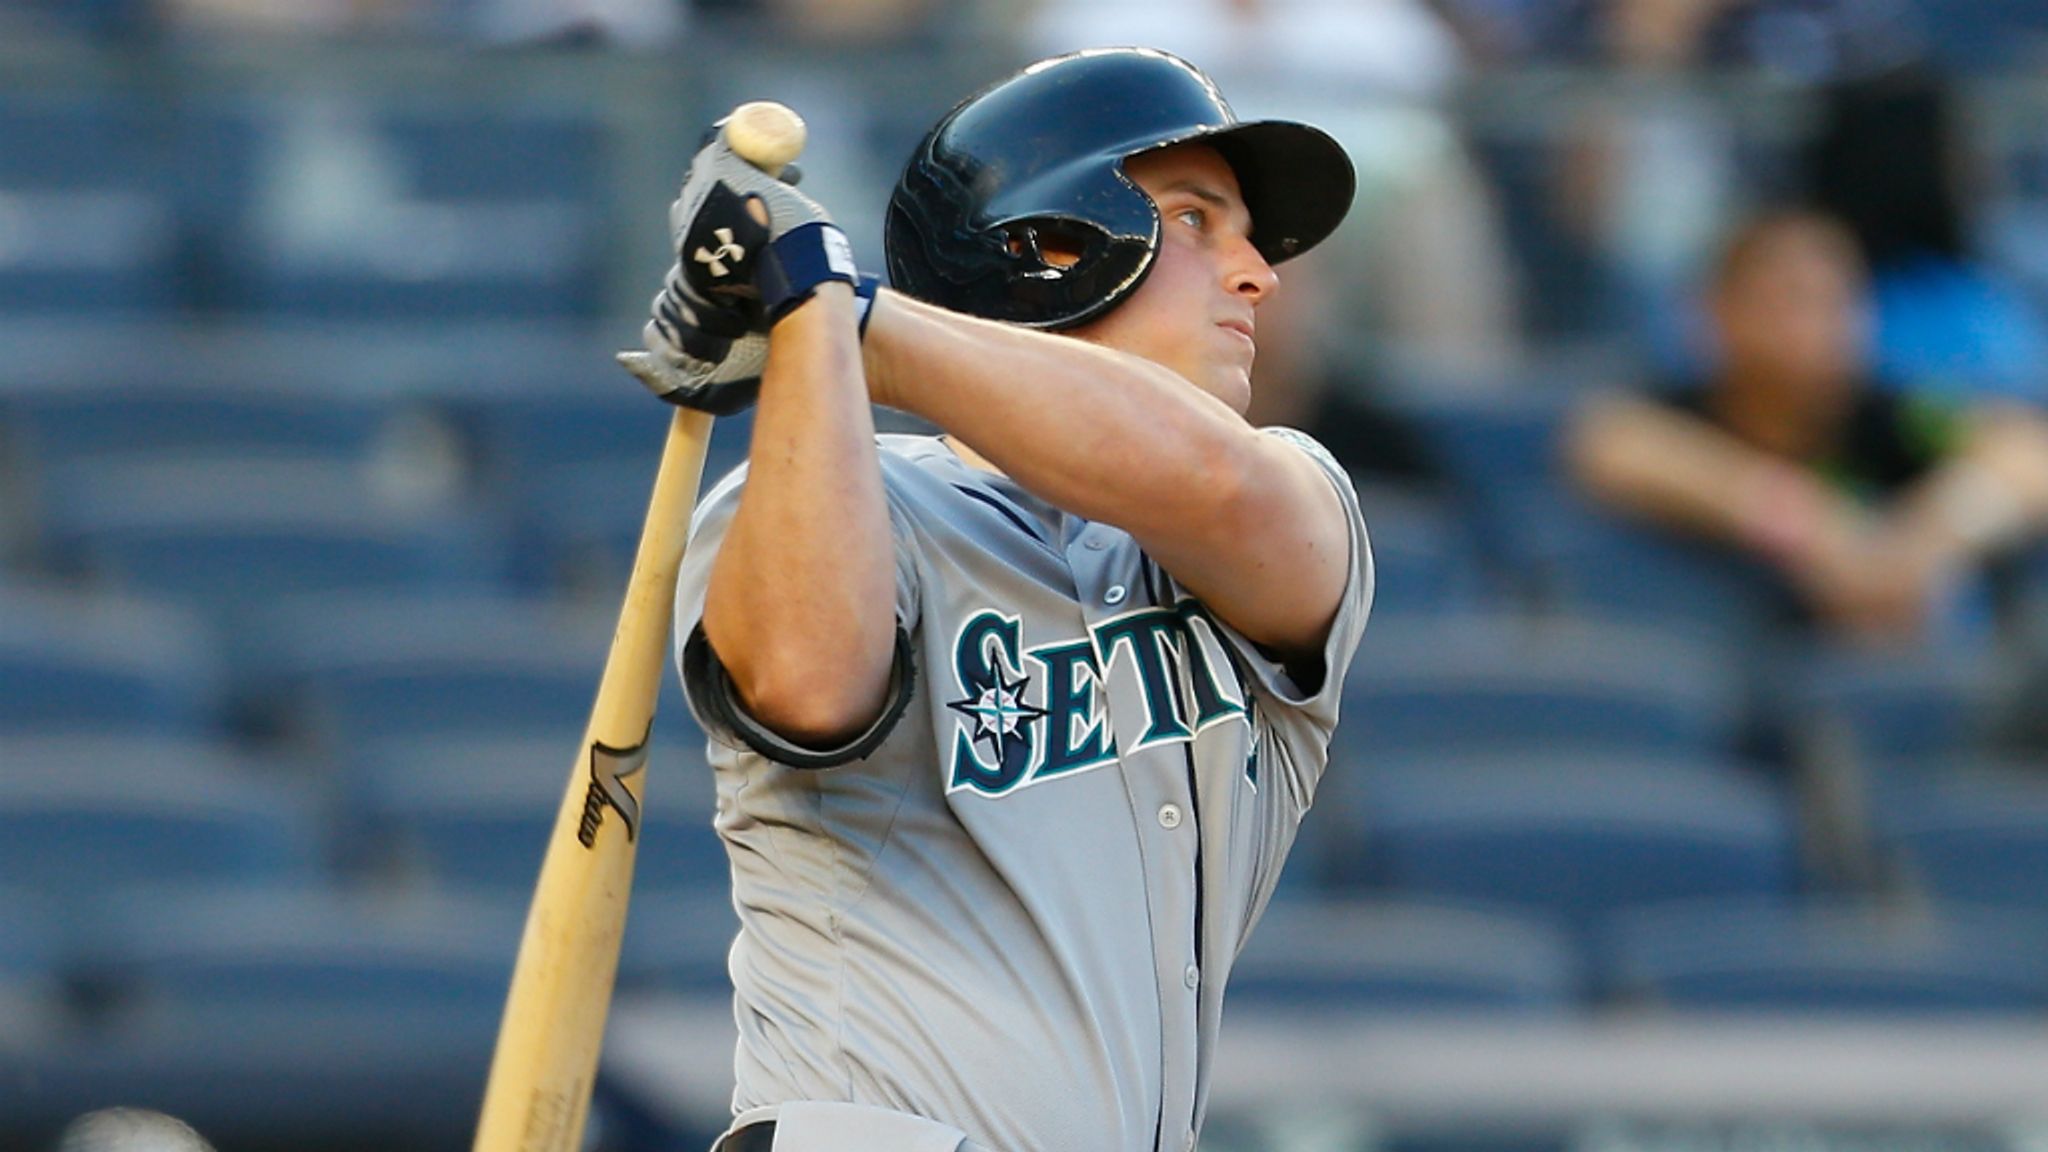 MLB: The Seattle Mariners close in on American League wildcard